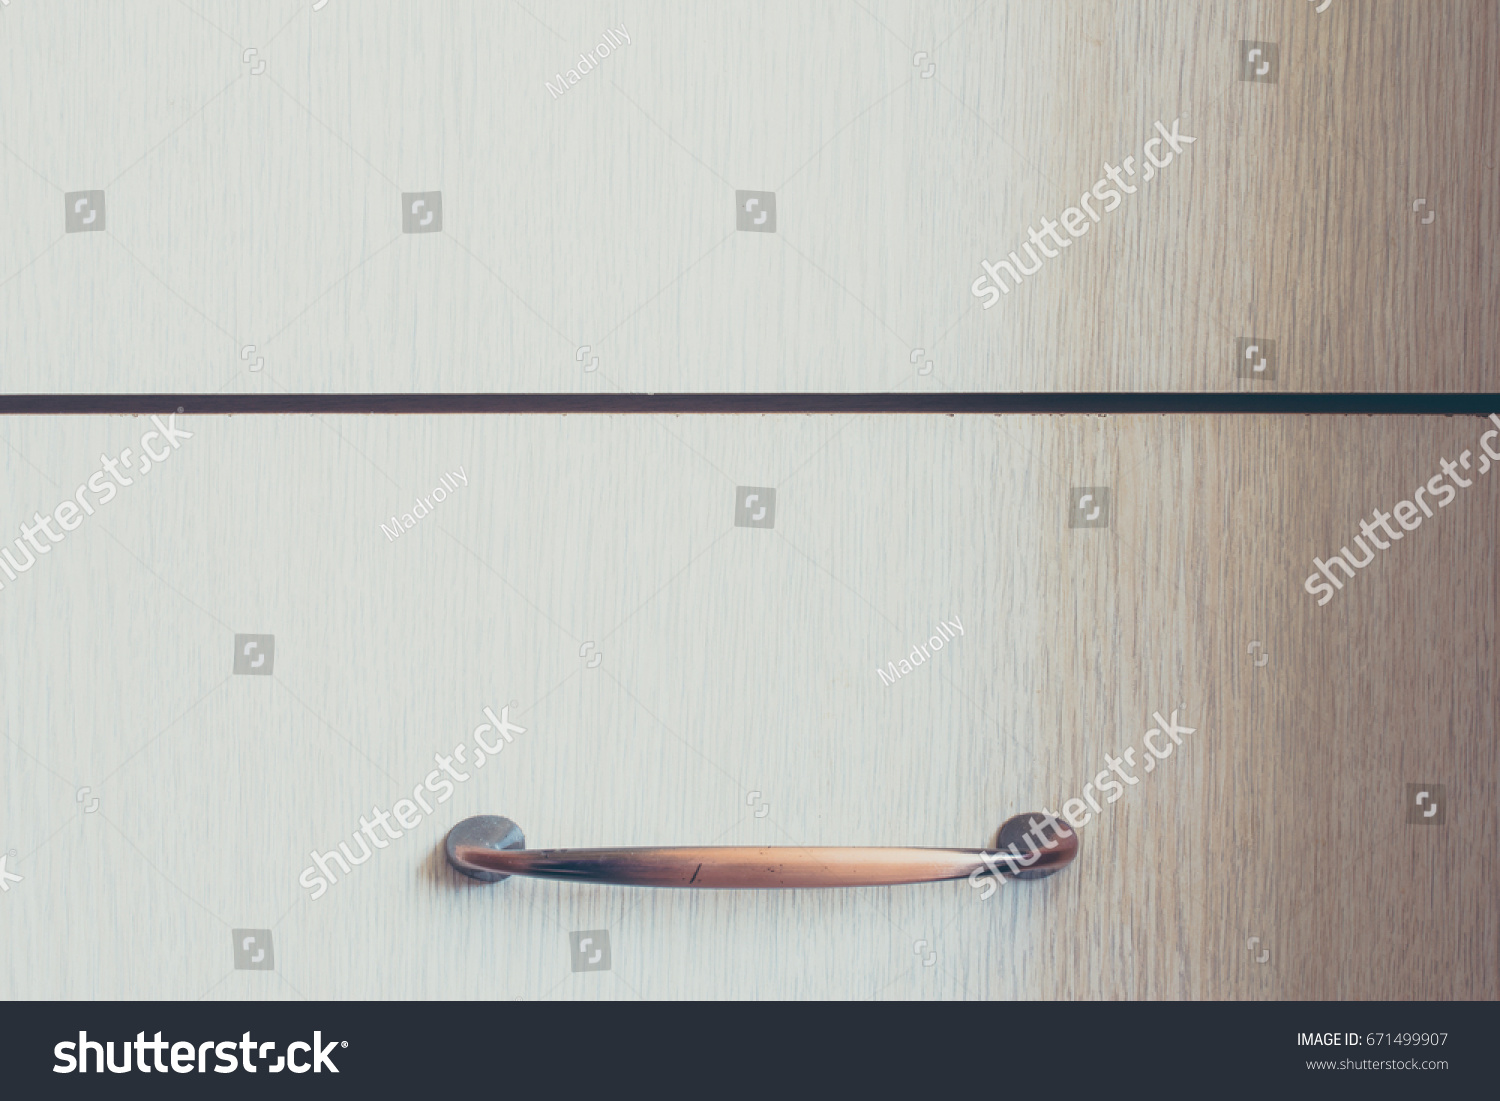 Wood texture background. Closeup to handle of a furniture. #671499907